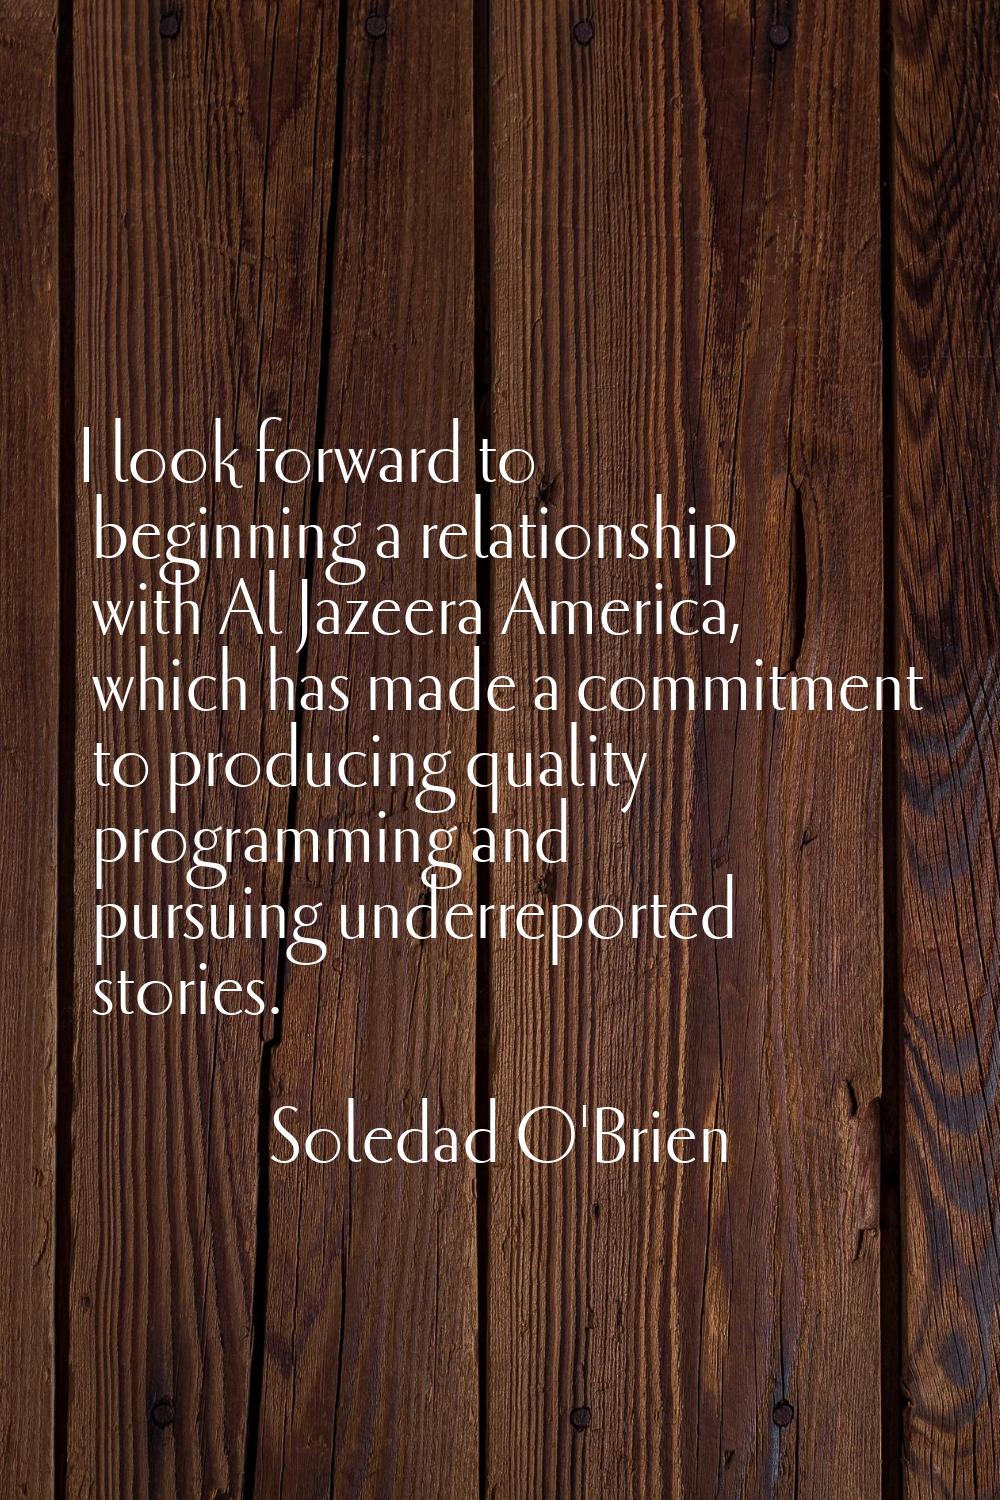 I look forward to beginning a relationship with Al Jazeera America, which has made a commitment to 